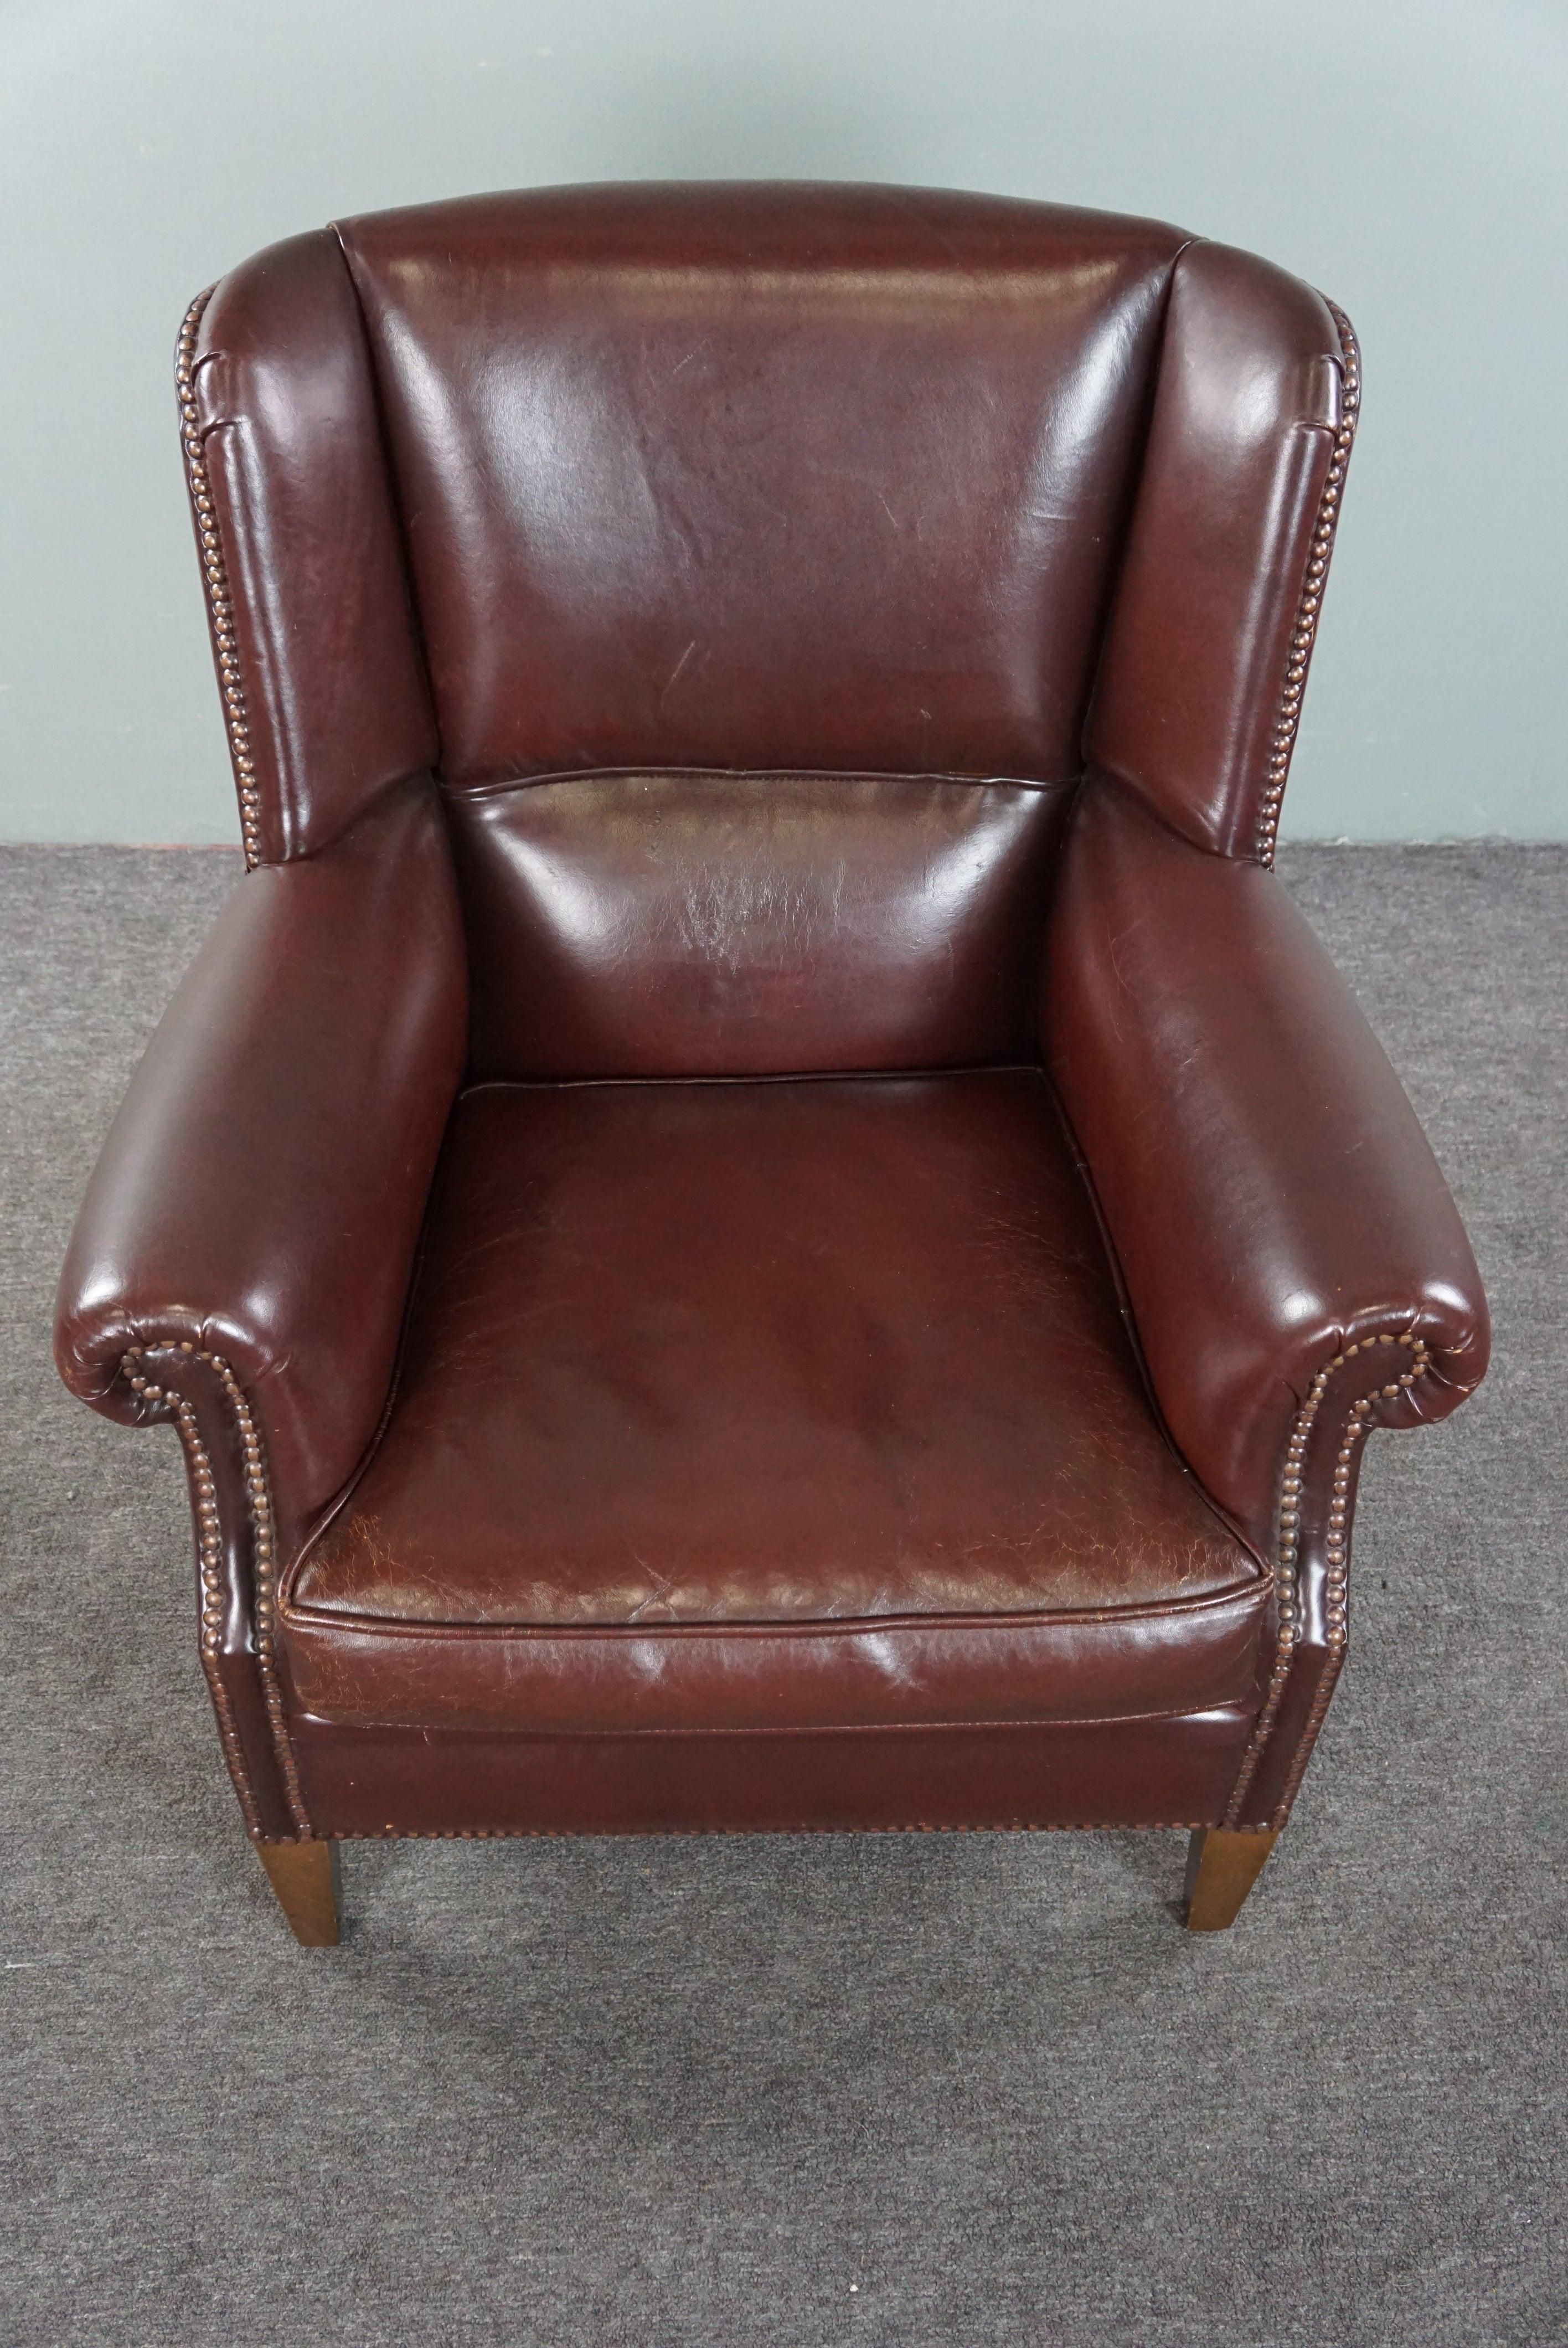 Comfortable sheep leather armchair in a beautiful warm color For Sale 1